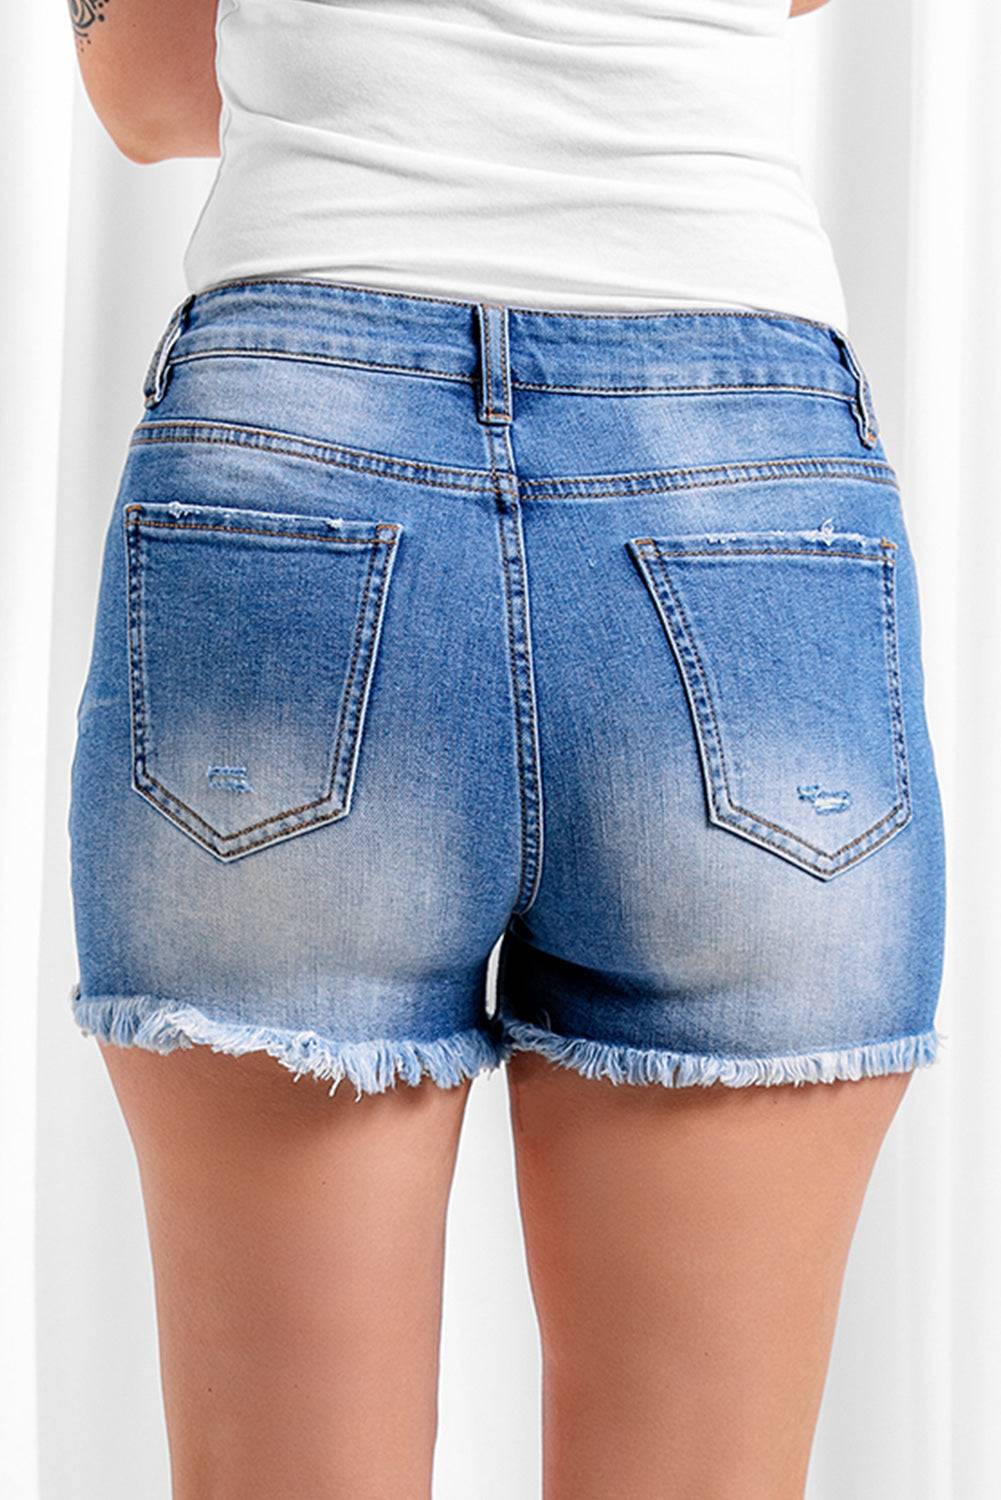 Back View, Exposed Button Fly Raw Hem Denim Shorts By THE BRAND Shopping